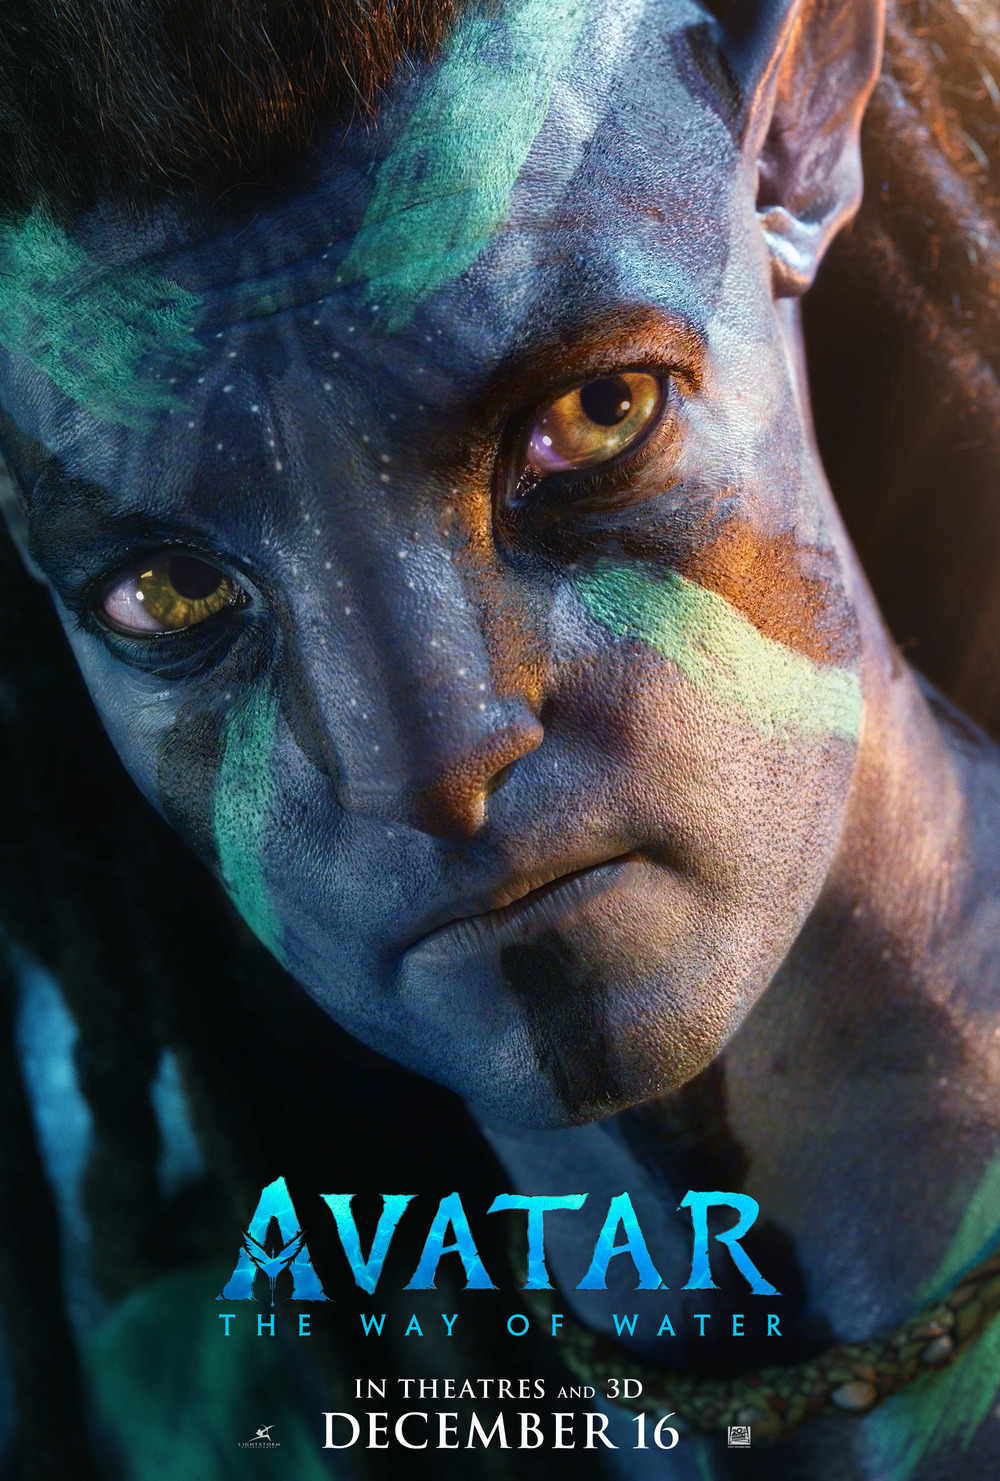 Avatar The Way Of Water 2022 English Movie iTunes 1080p | 720p | 480p HQ HDRip ESub Download